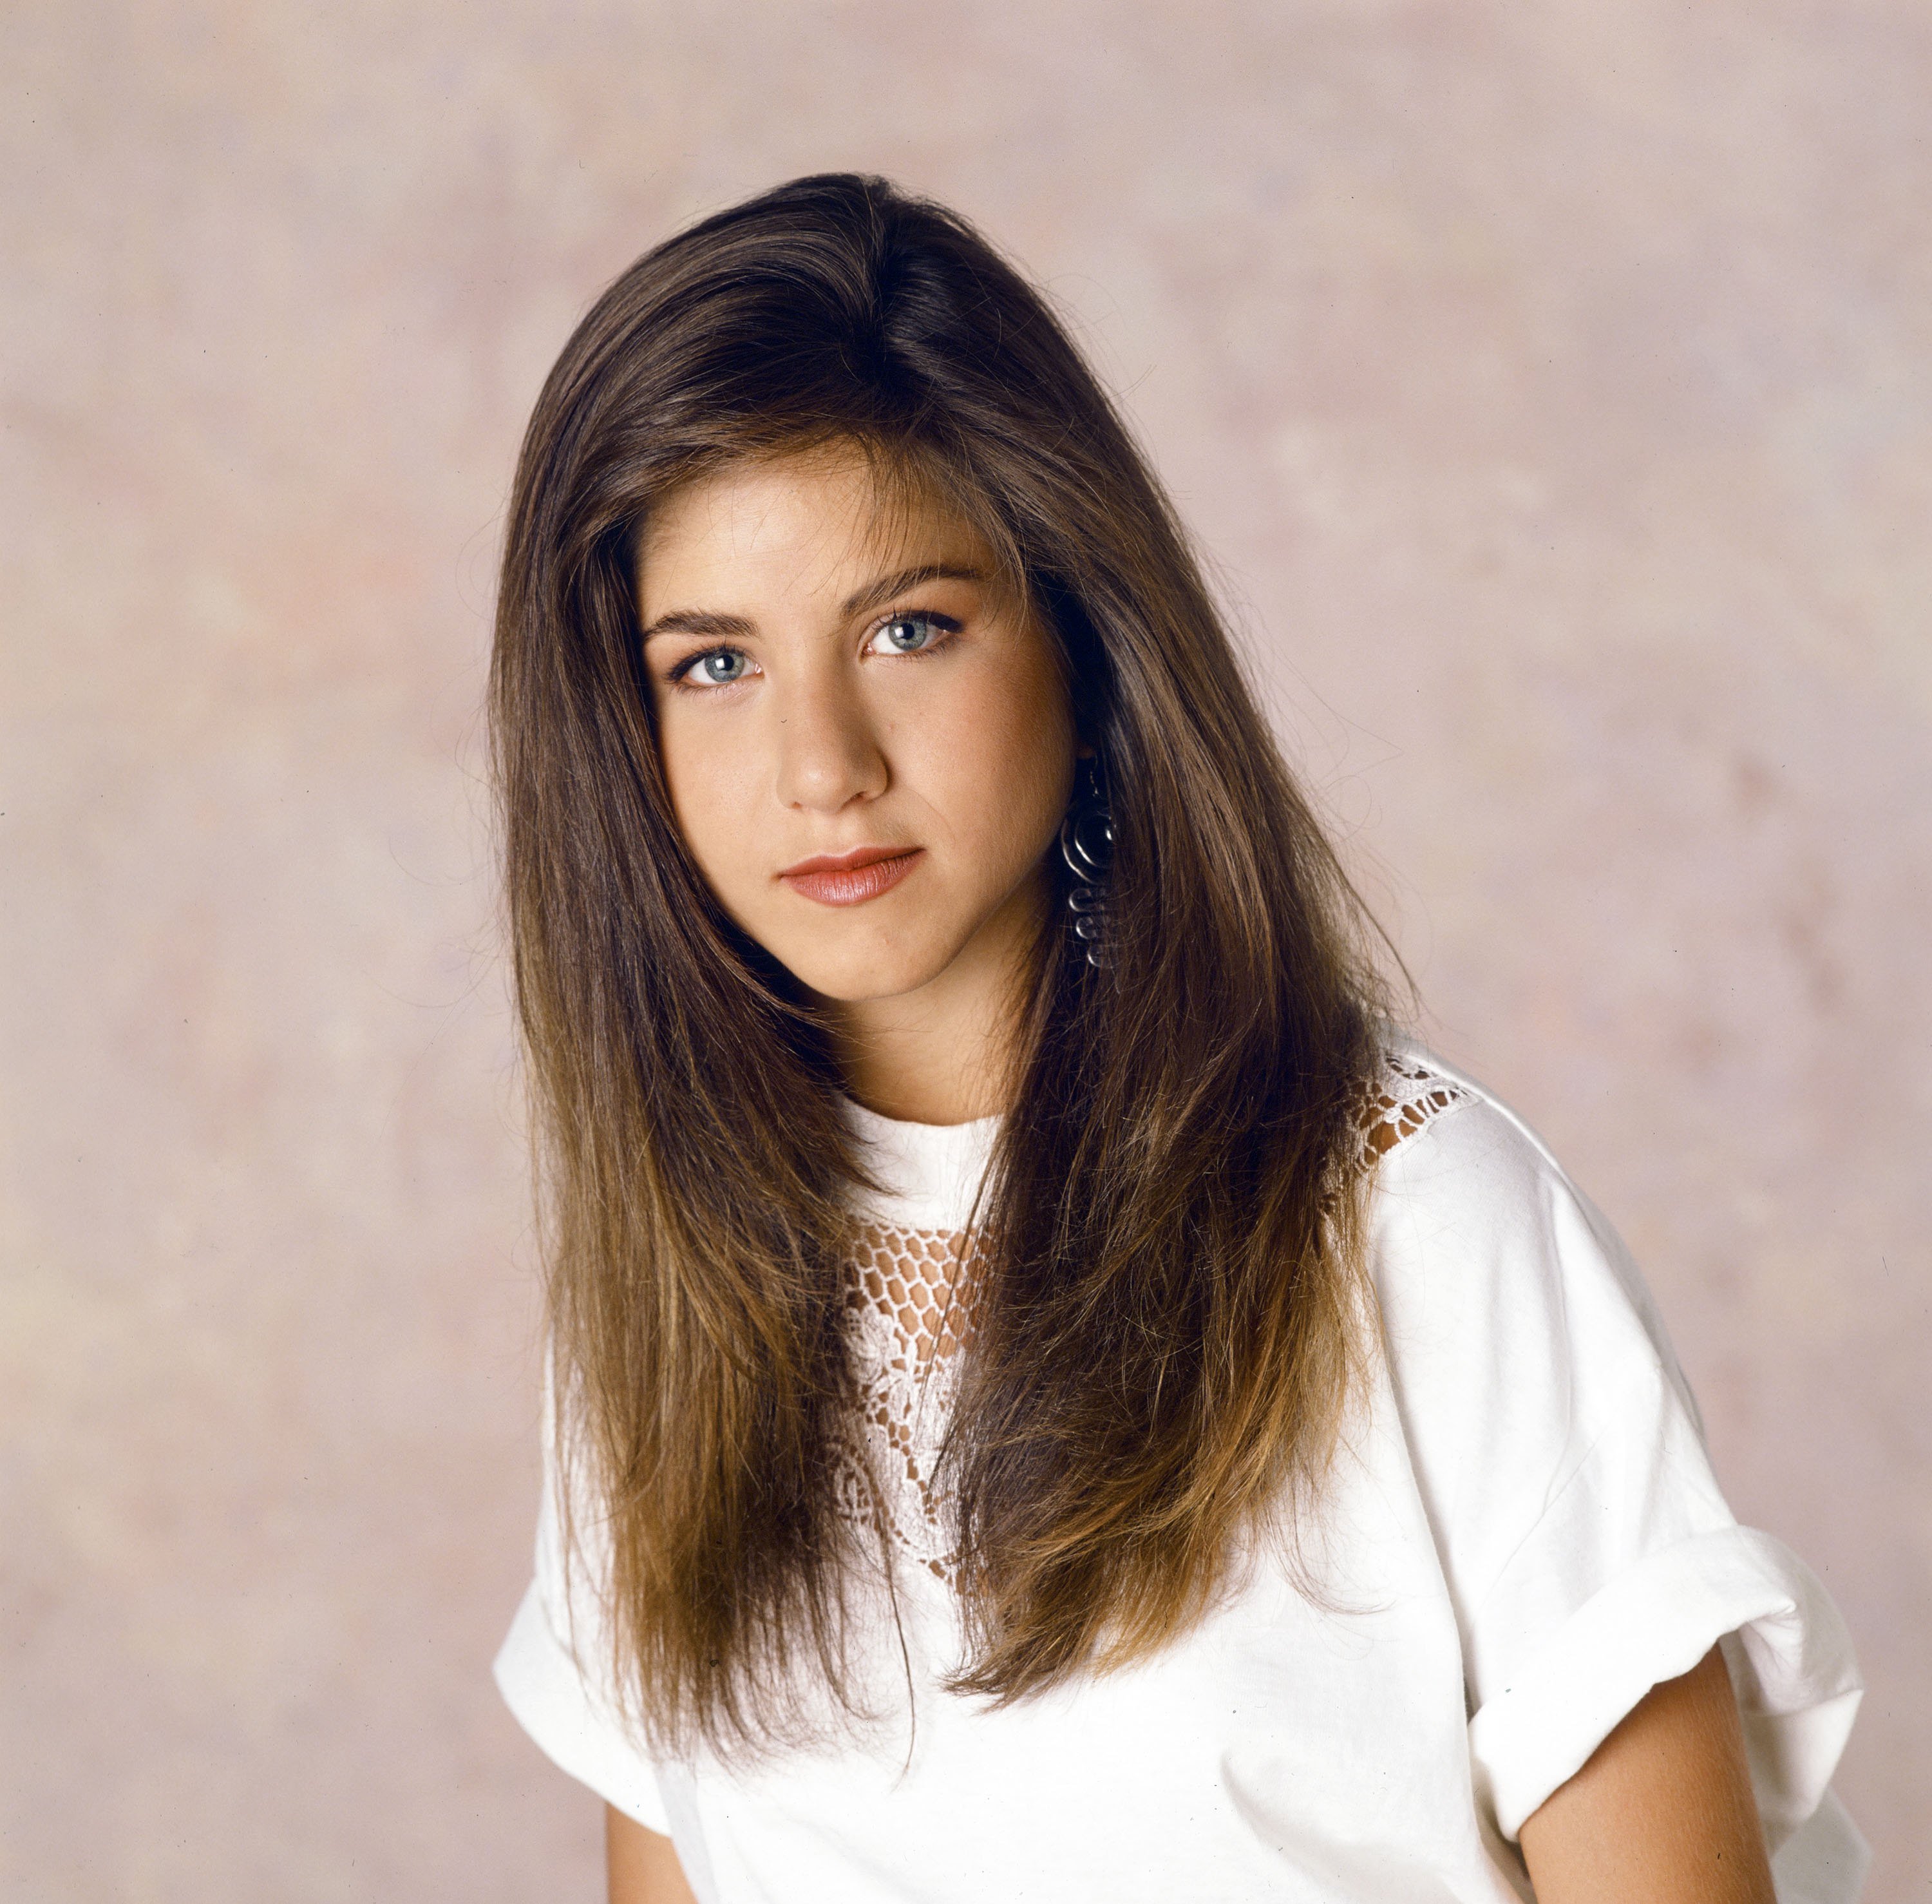 Jennifer Aniston as Jeannie Bueller in the film "Ferris Bueller" on June 19, 1990. | Source: Alice S. Hall/NBC/NBCU Photo Bank/Getty Images